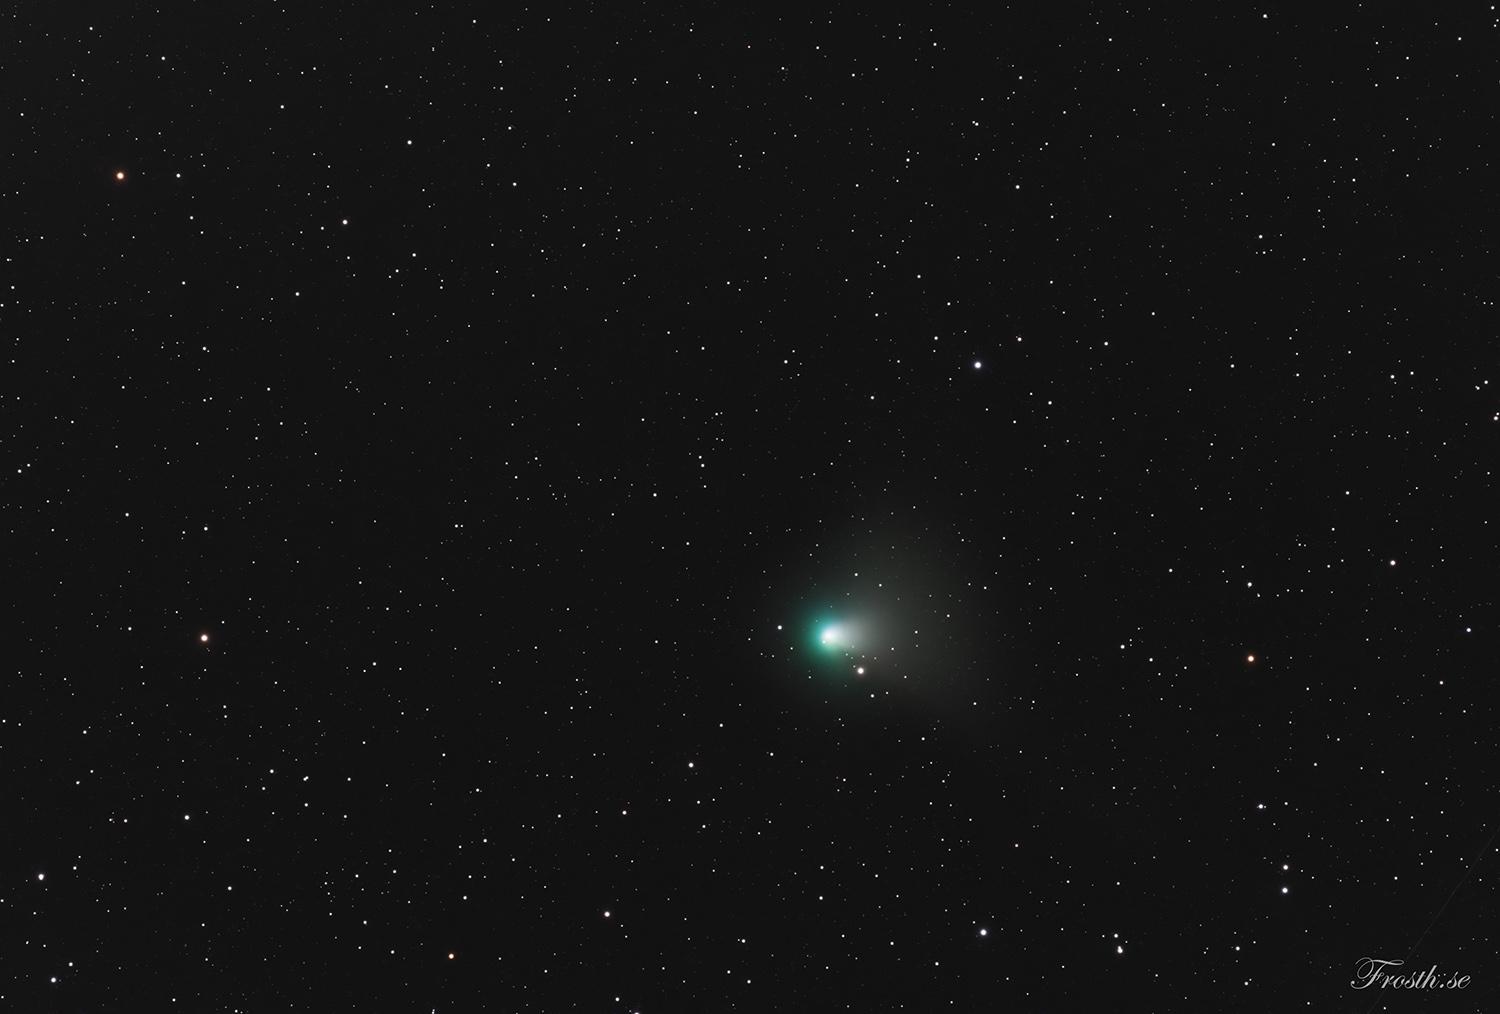 Comet C/2022 E3 (ZTF) on January 3, 2023, imaged from Sweden by Frosth Astrophotography